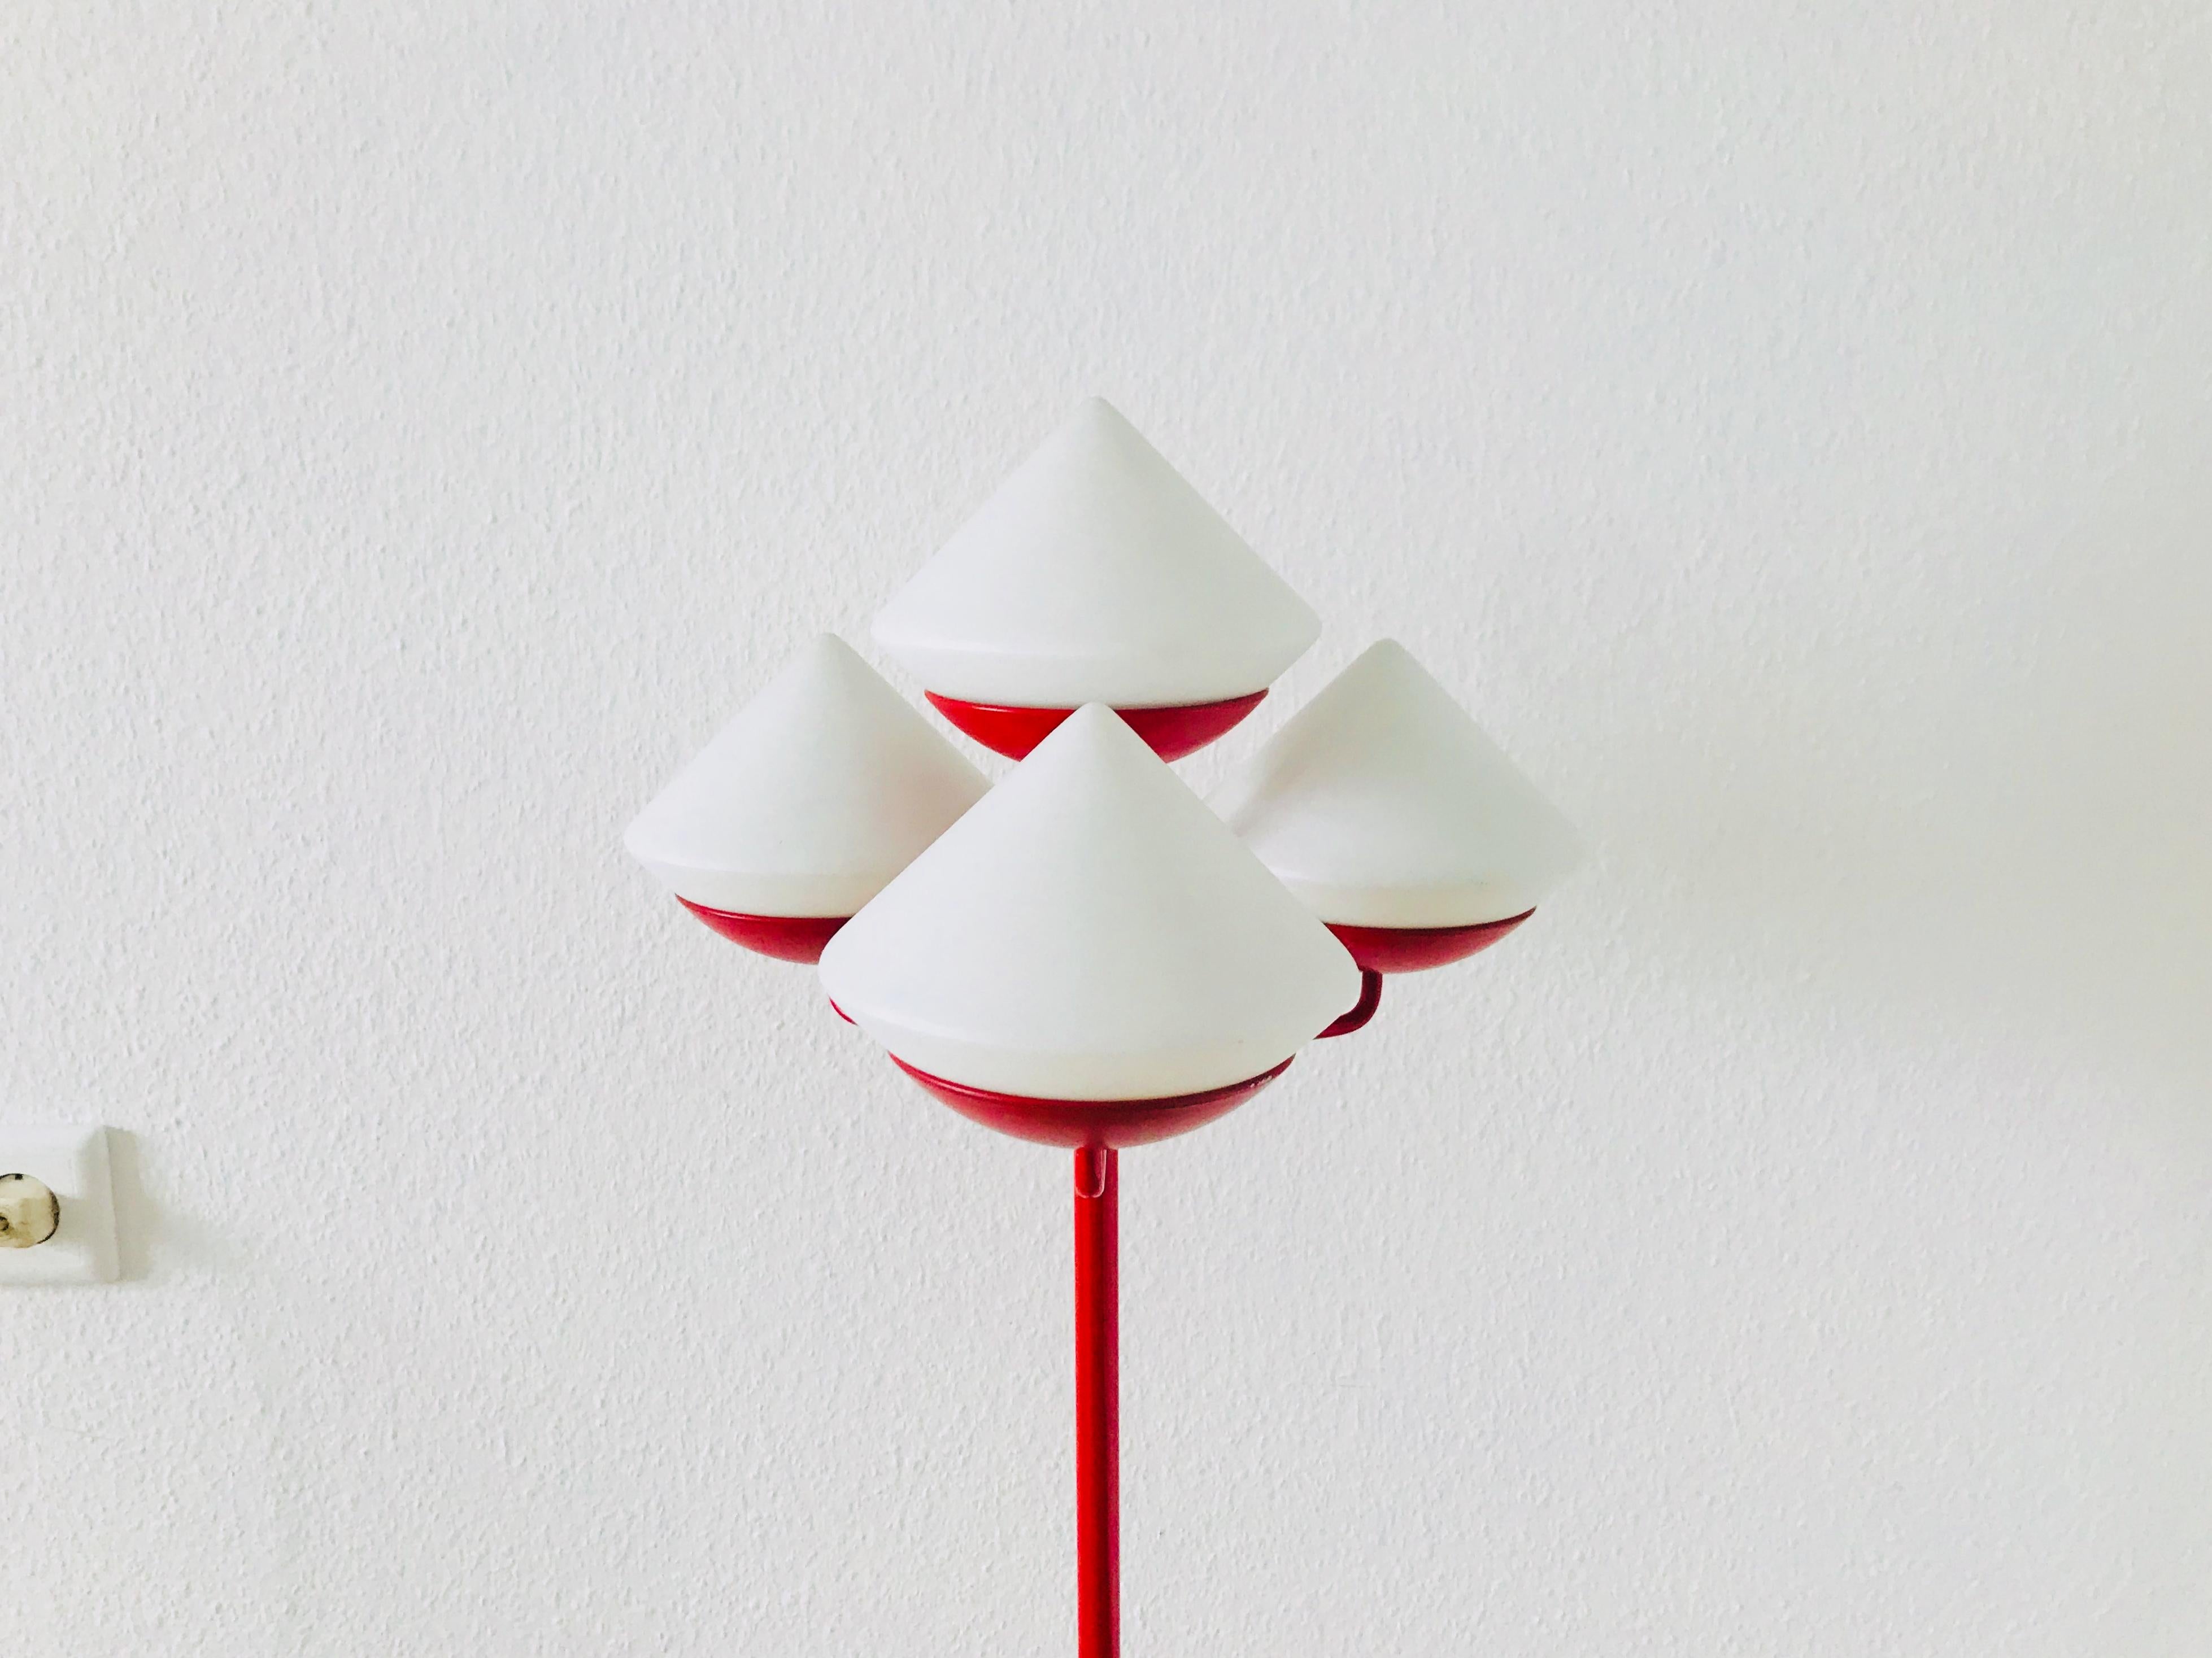 German Midcentury Red and White 4-Arm Space Age Floor Lamp Attributed to Kaiser, 1960s